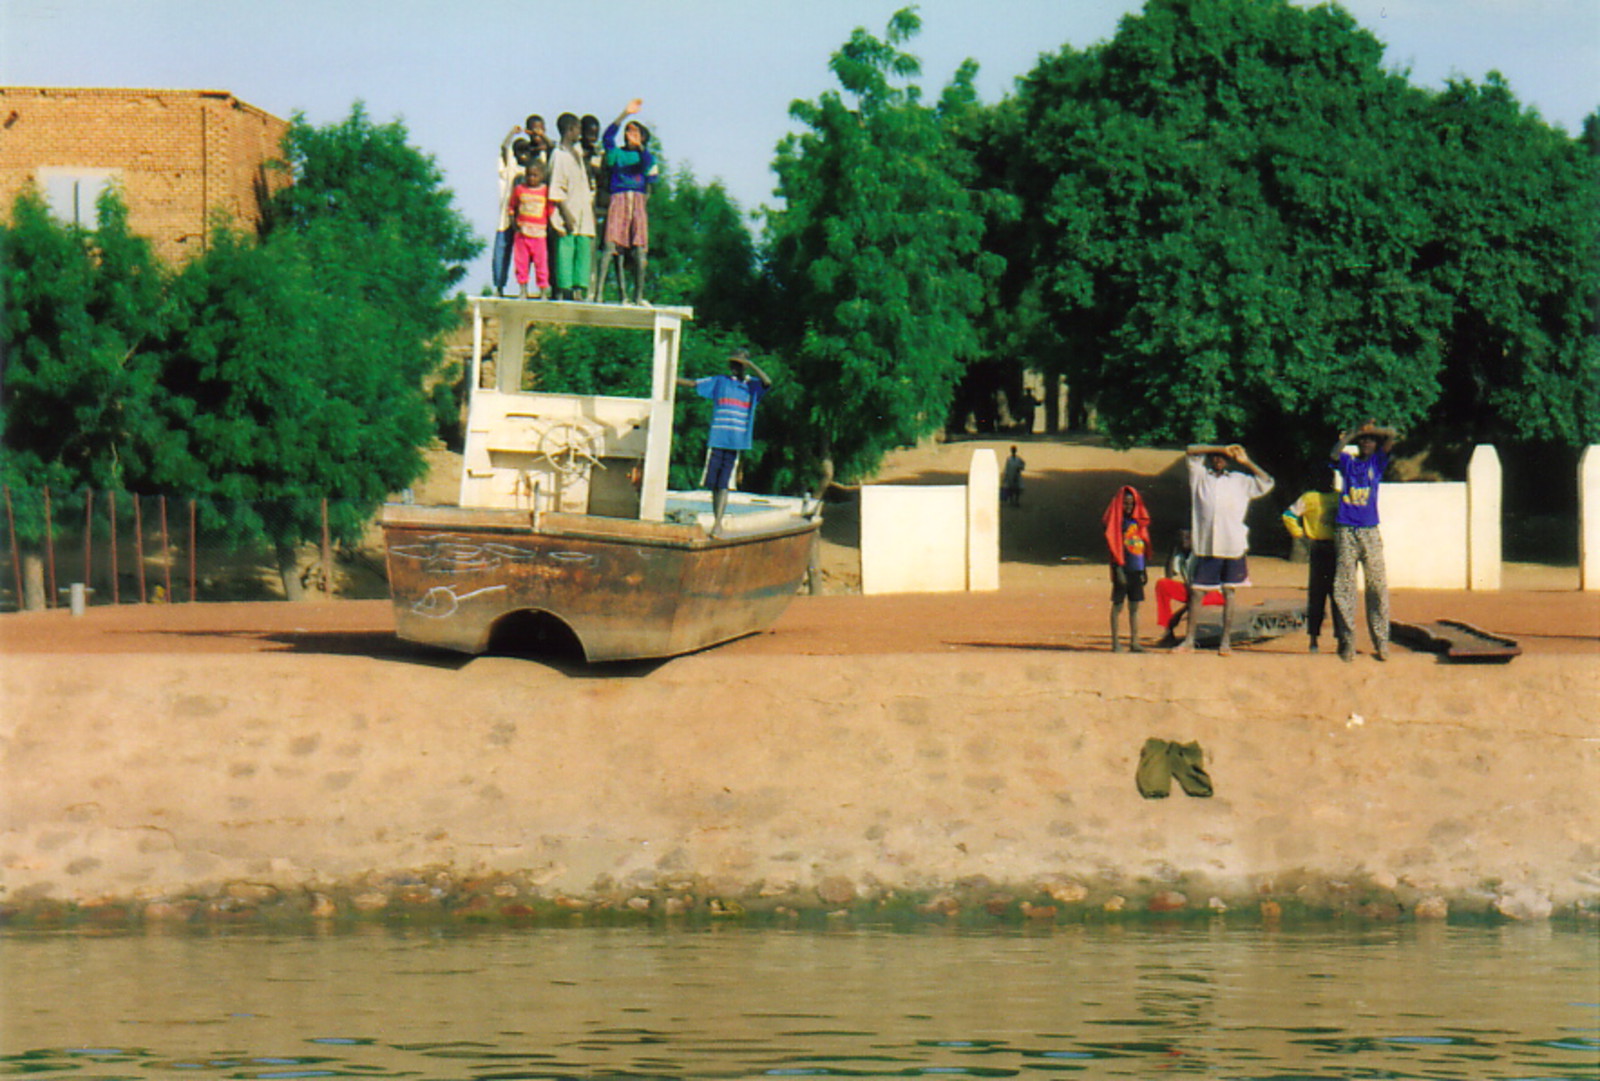 A beached fishing trawler on the banks of the River Niger